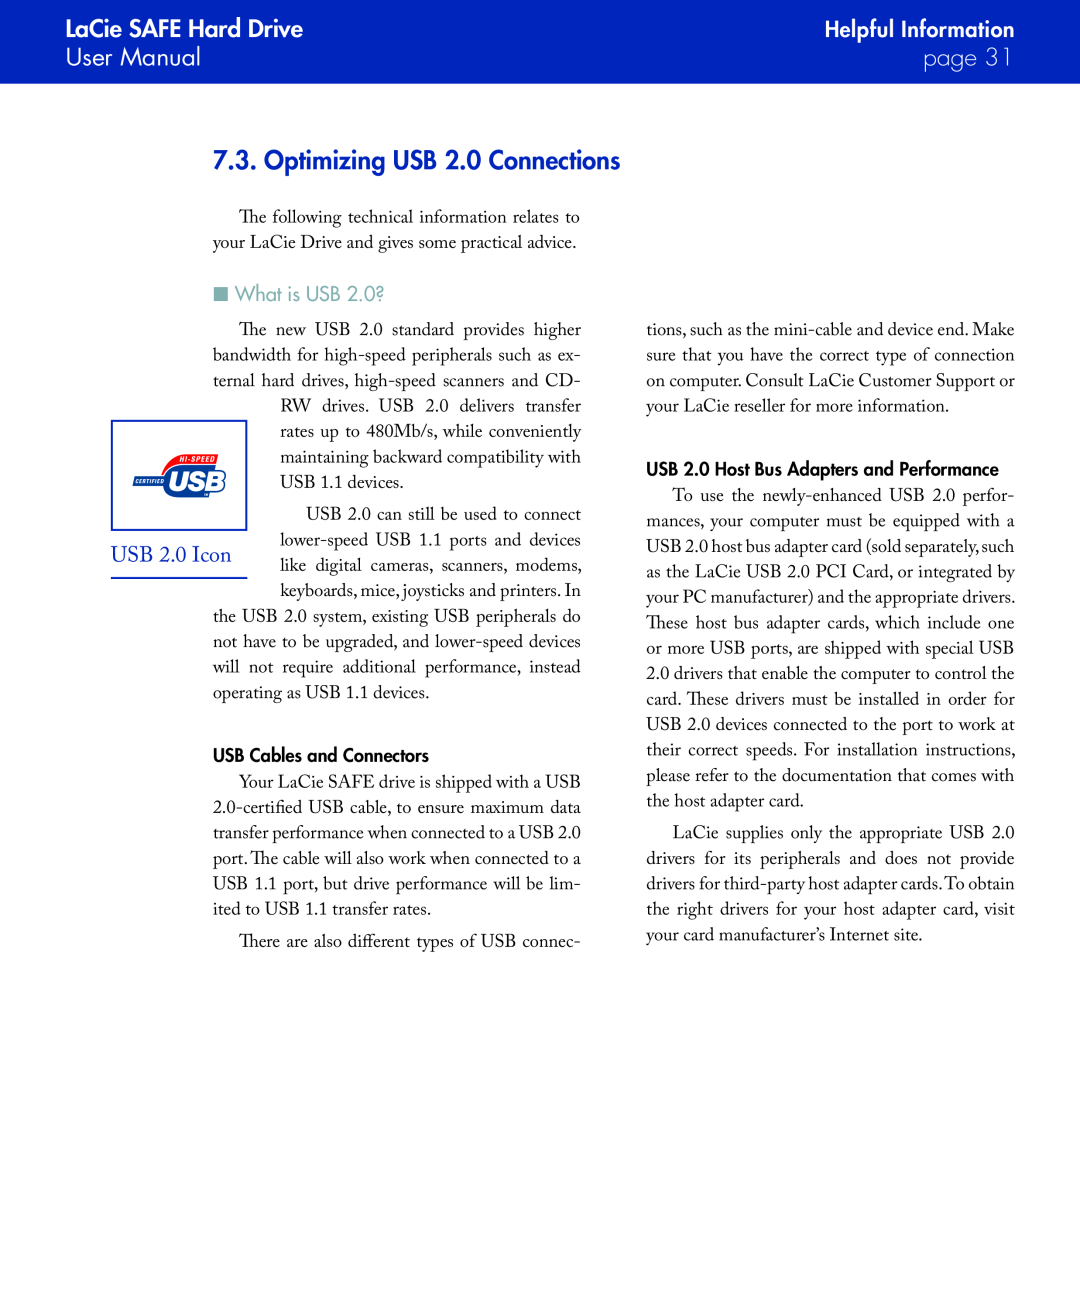 LaCie Optimizing USB 2.0 Connections, n What is USB 2.0?, LaCie SAFE Hard Drive, User Manual, page, Helpful Information 